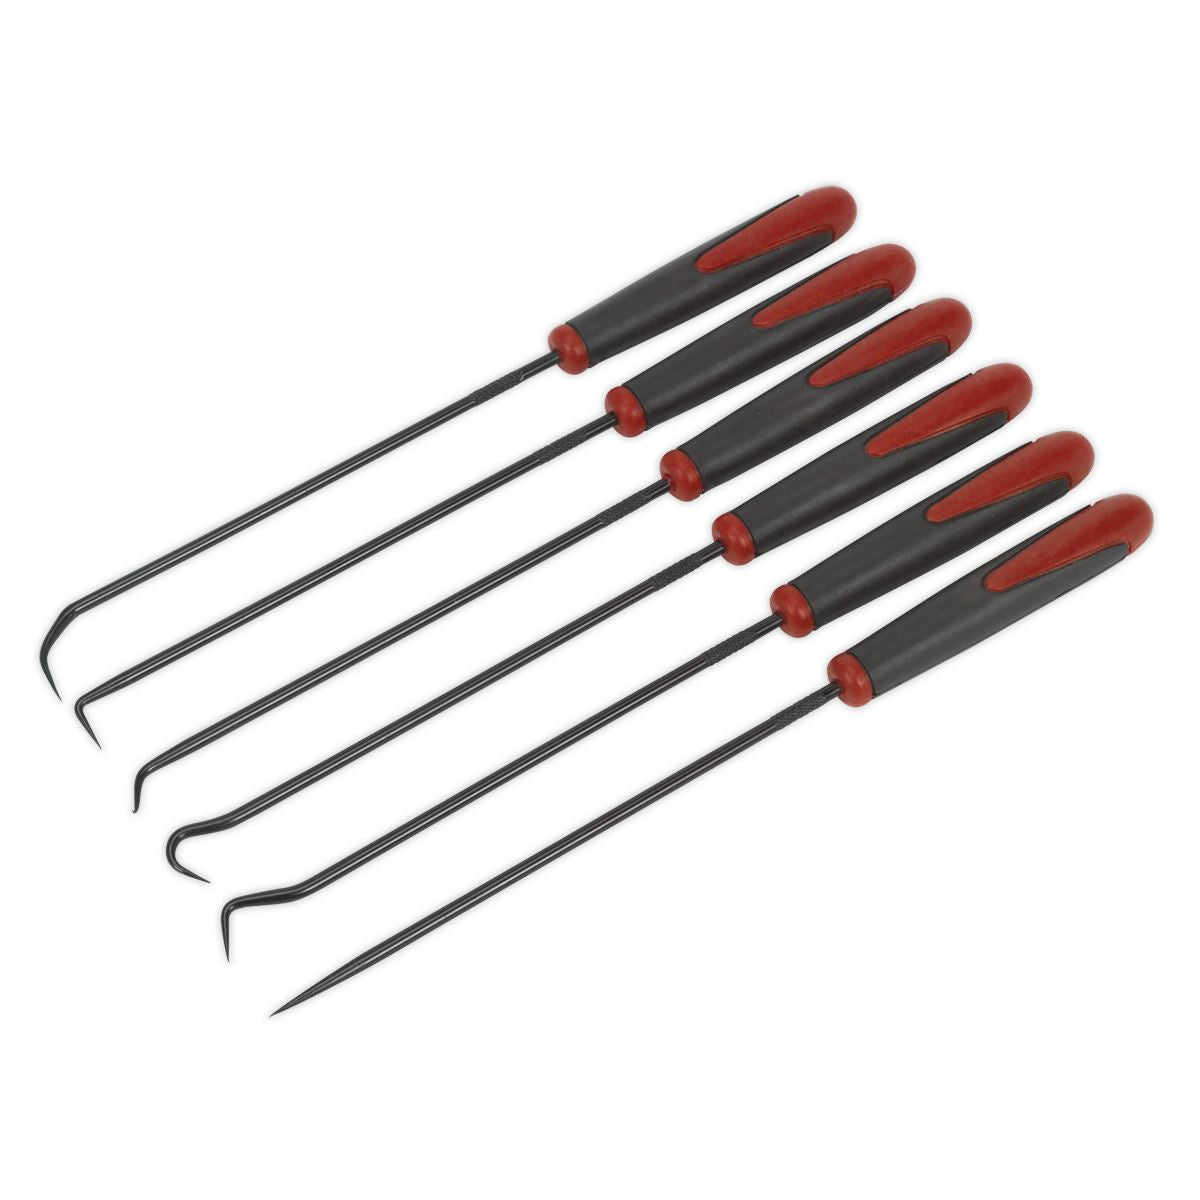 Sealey Hook and Pick Set Extra Long 6 Piece